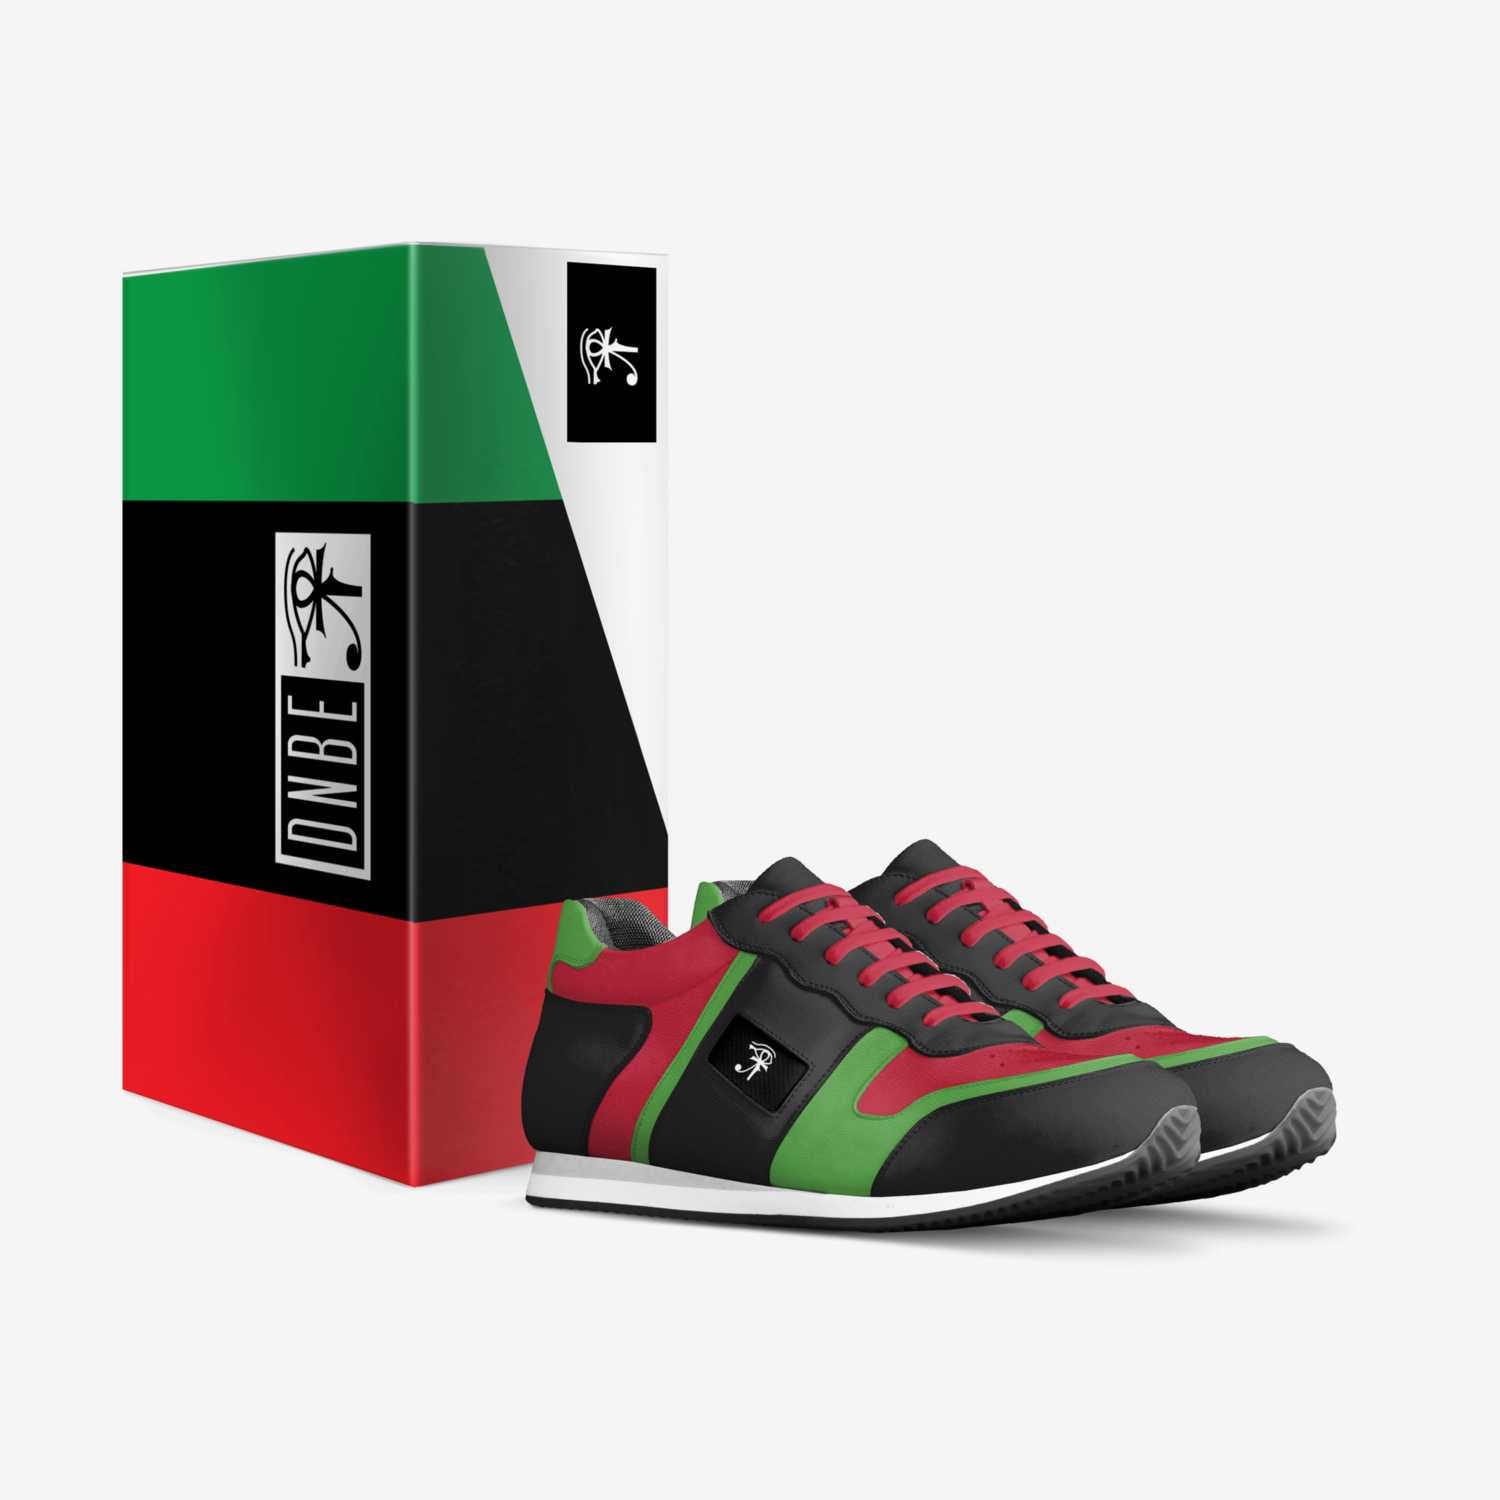 RUN RBG custom made in Italy shoes by Dnbe Apparel | Box view